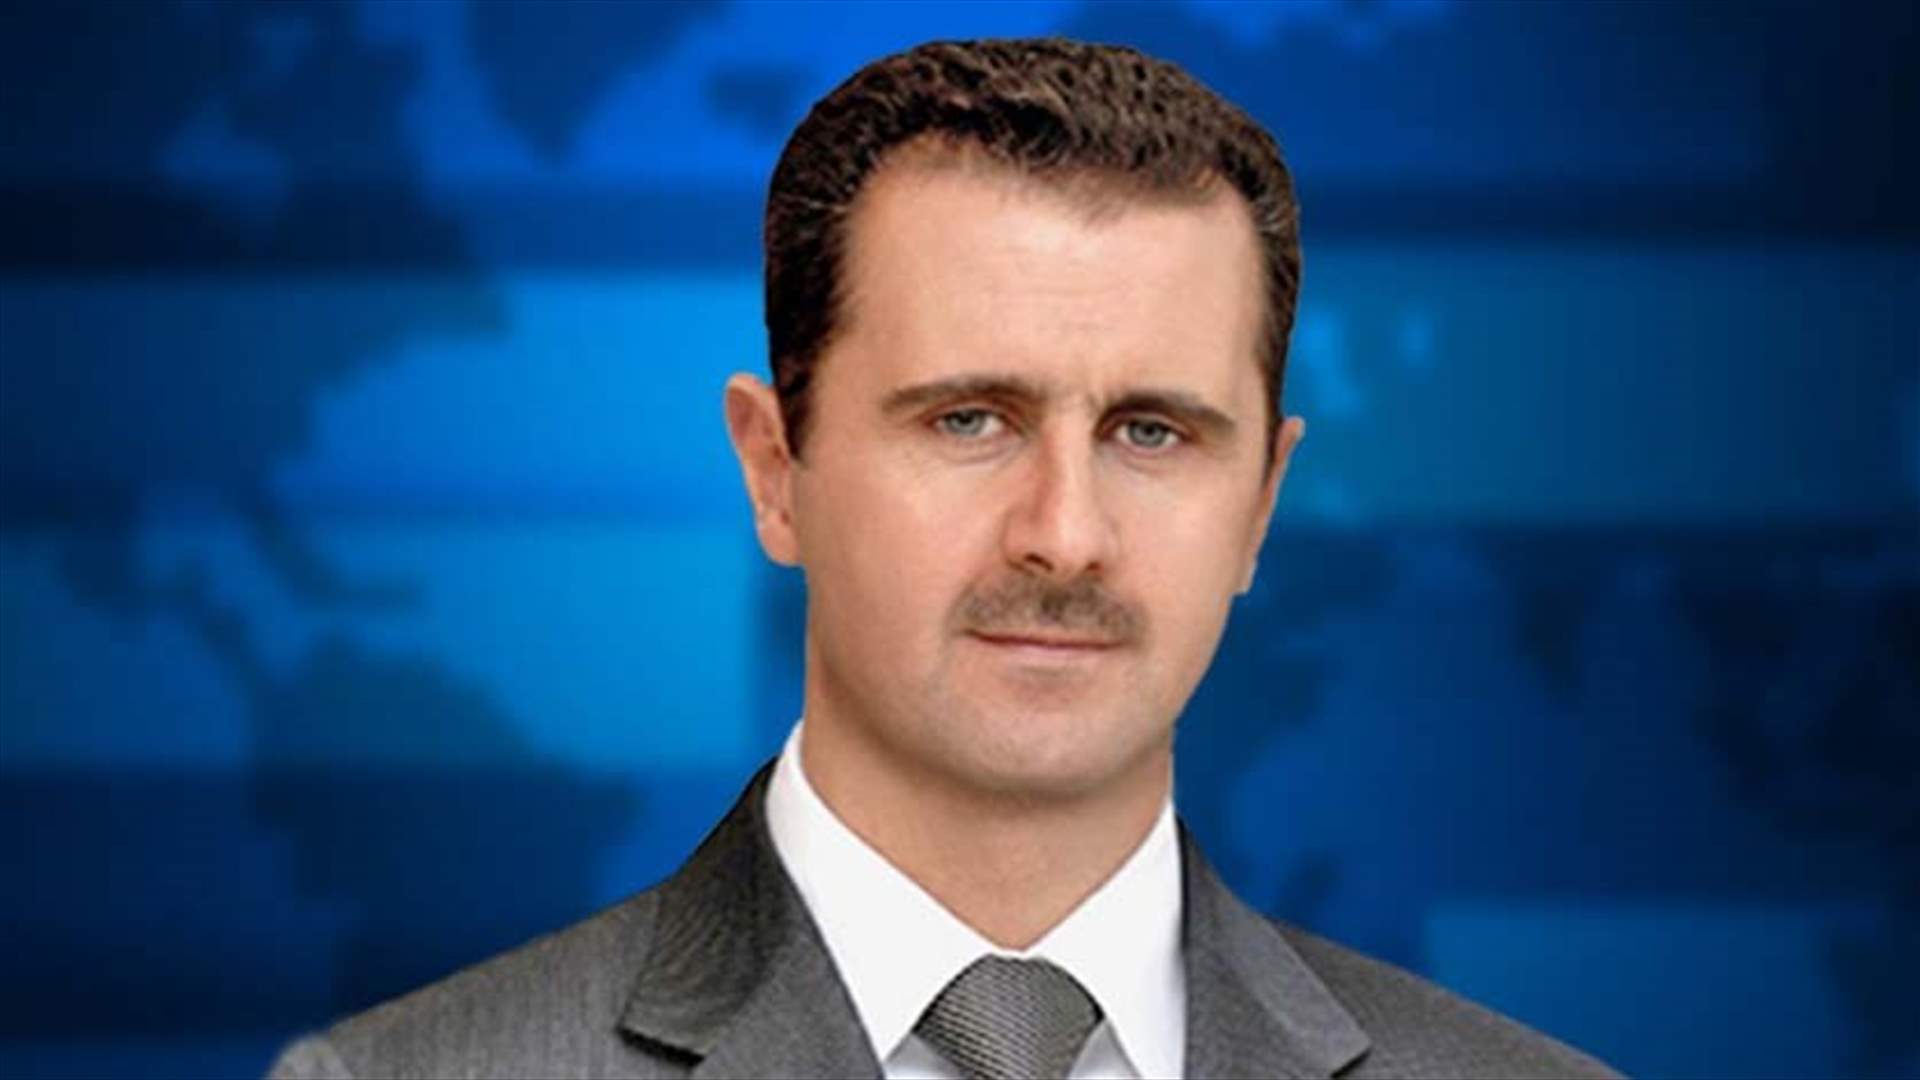 Assad offers amnesty for Syria rebels who lay down arms